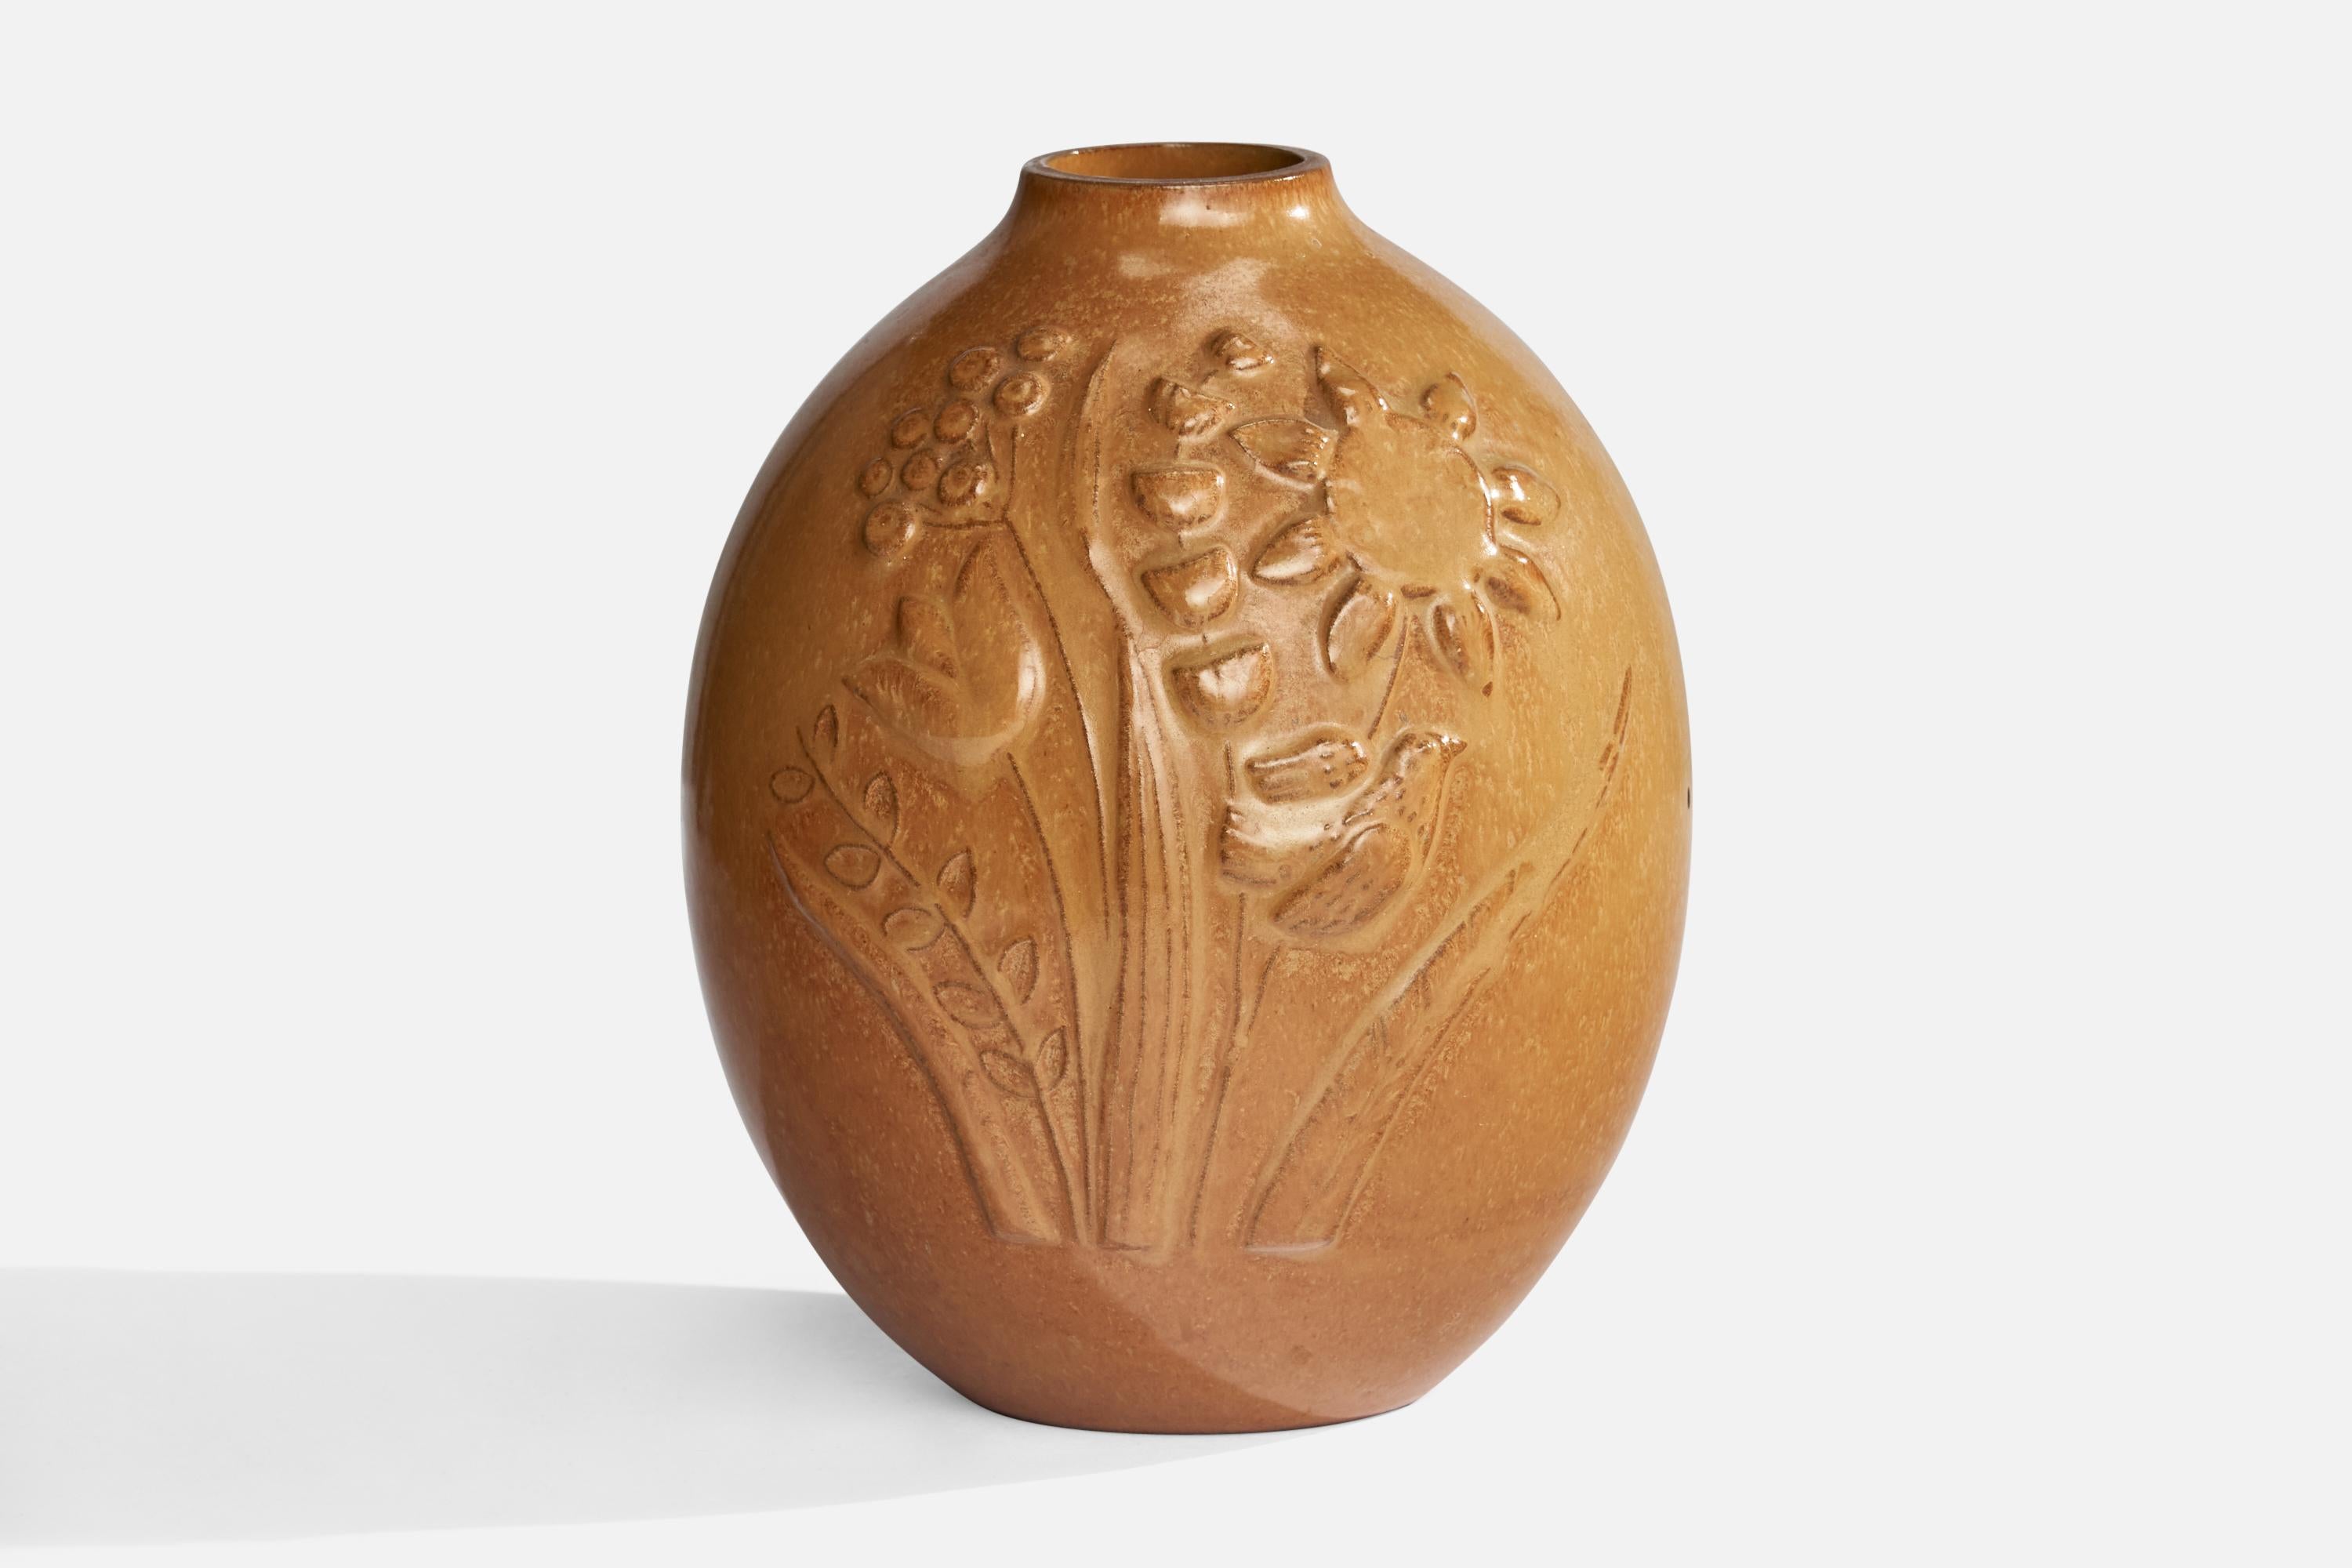 A brown-glazed stoneware vase designed and produced by Gustavsberg, Sweden, 1940s.